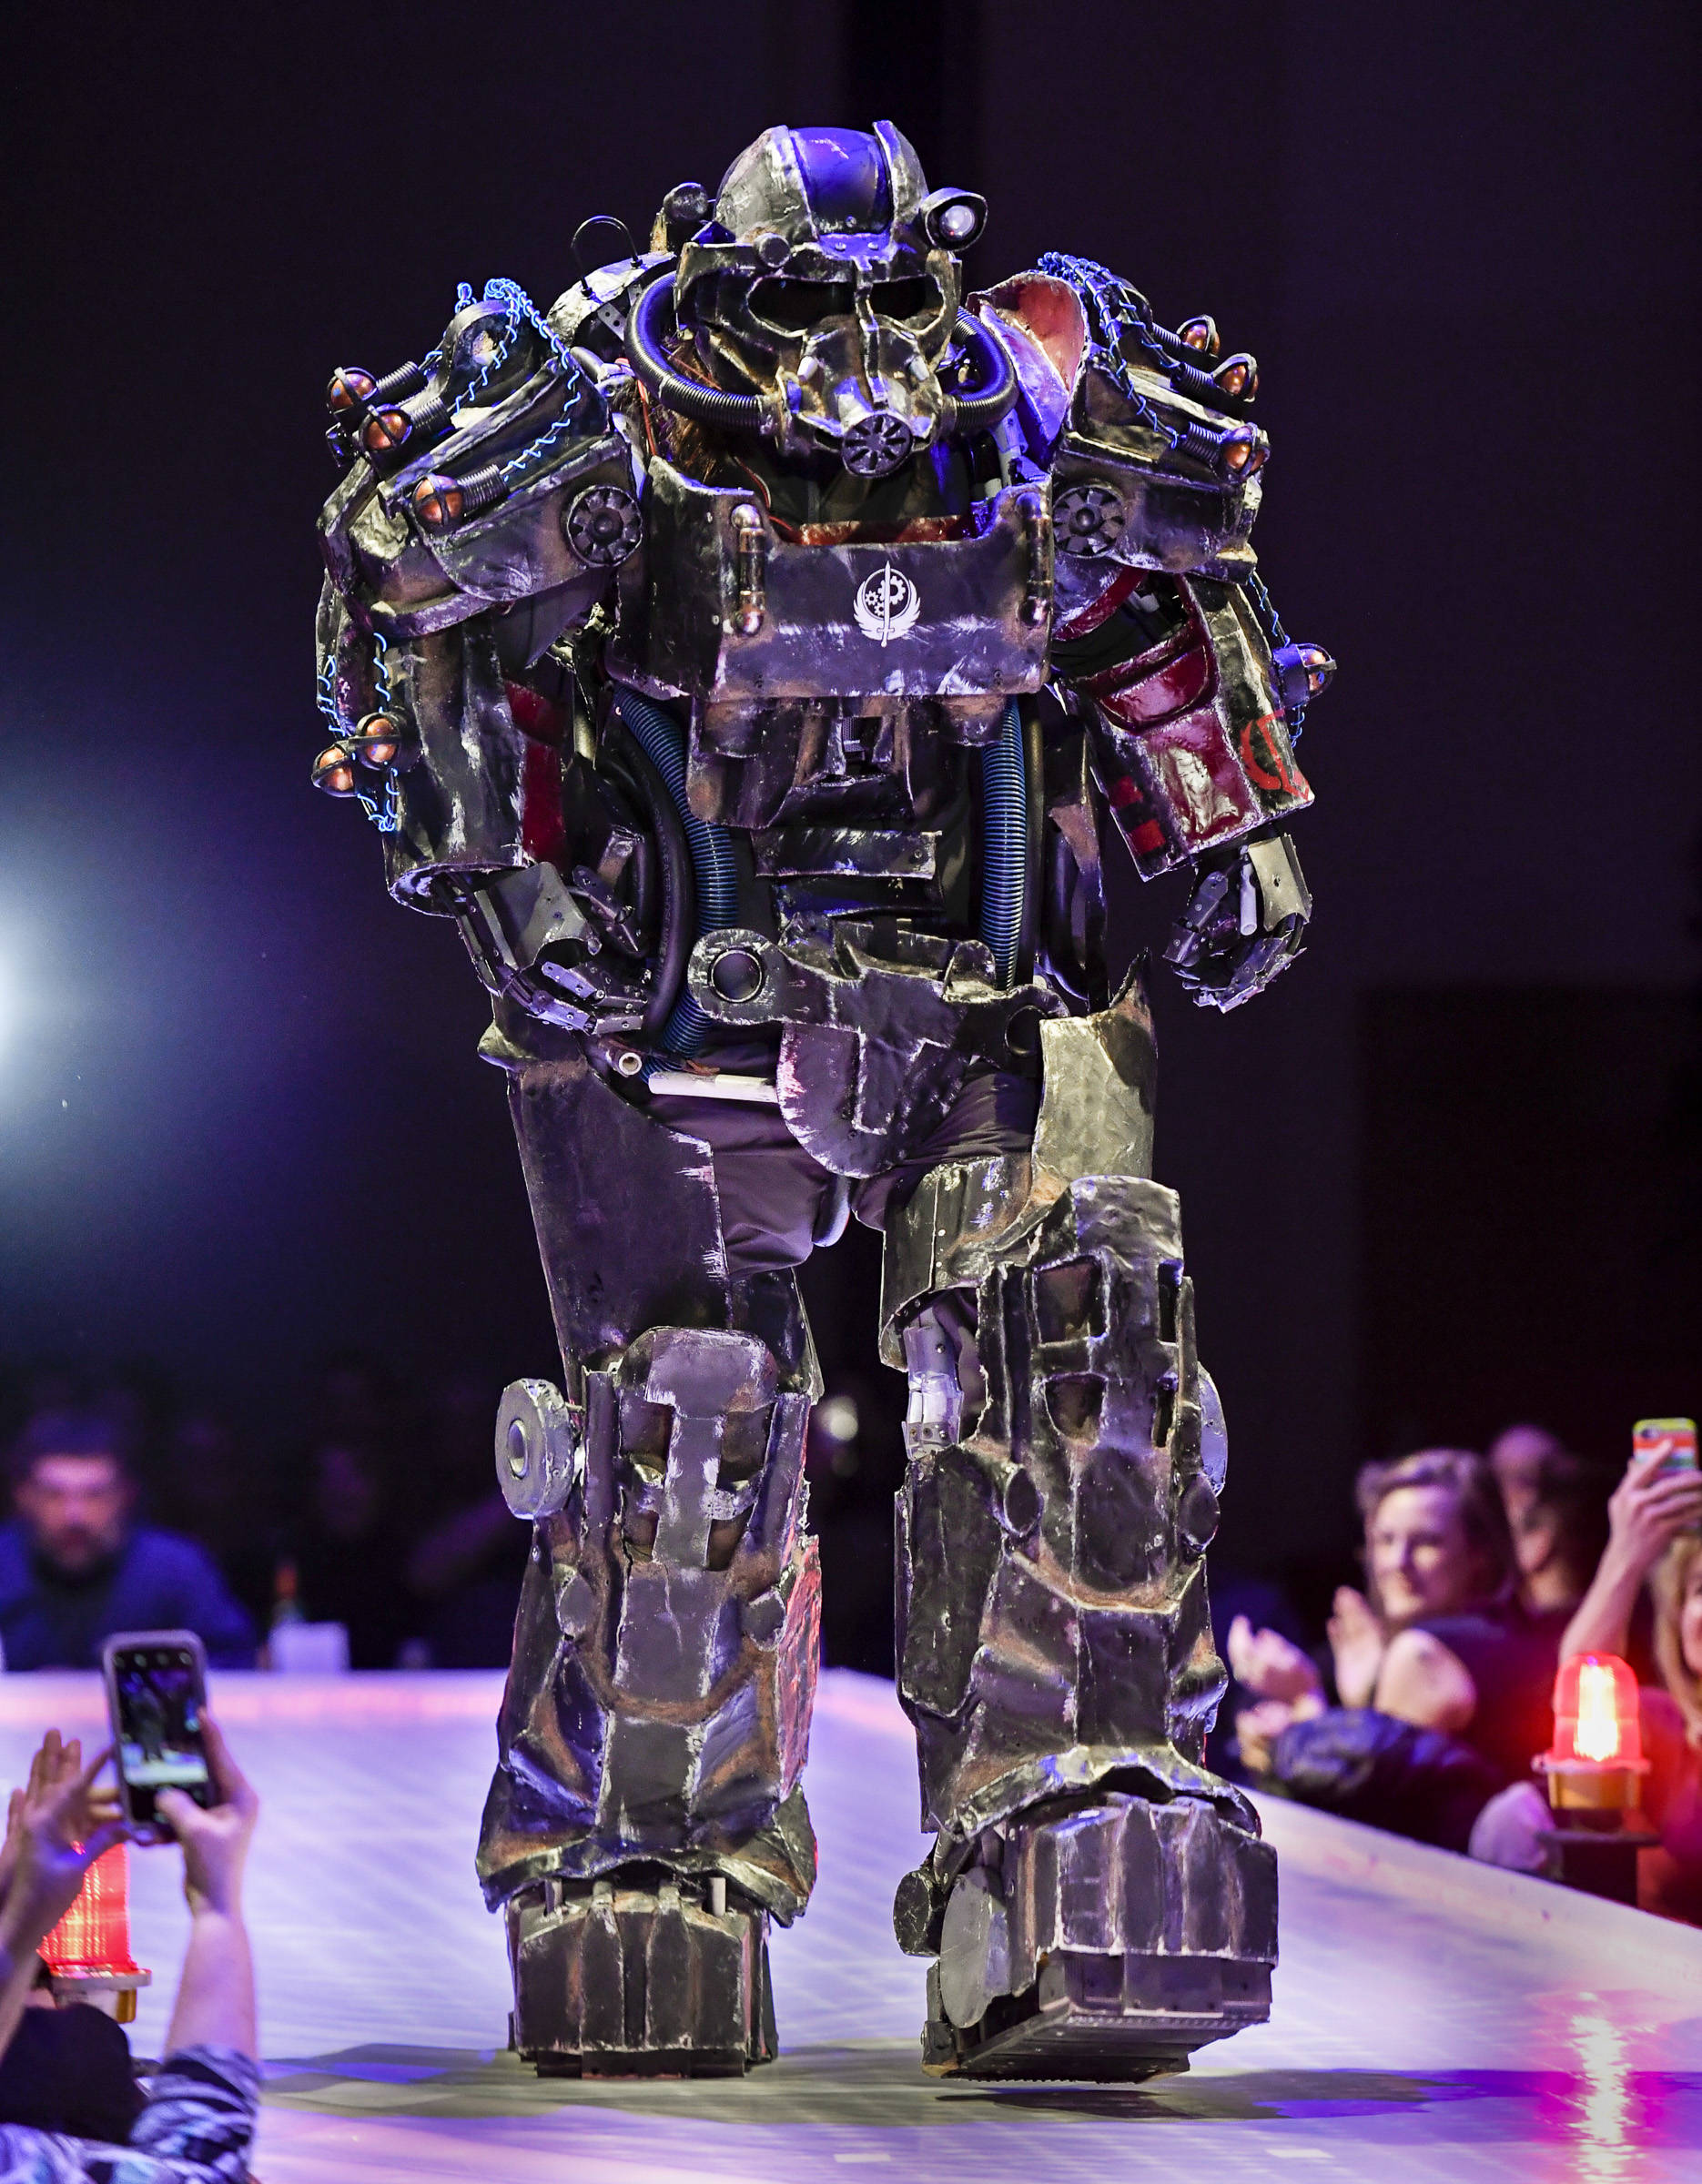 Morgan McCutcheon models his “T-60” at the Wearable Art show at Centennial Hall on Saturday, Feb. 16, 2019. The entry placed first in the People’s Choice Award. (Michael Penn | Capital City Weekly)